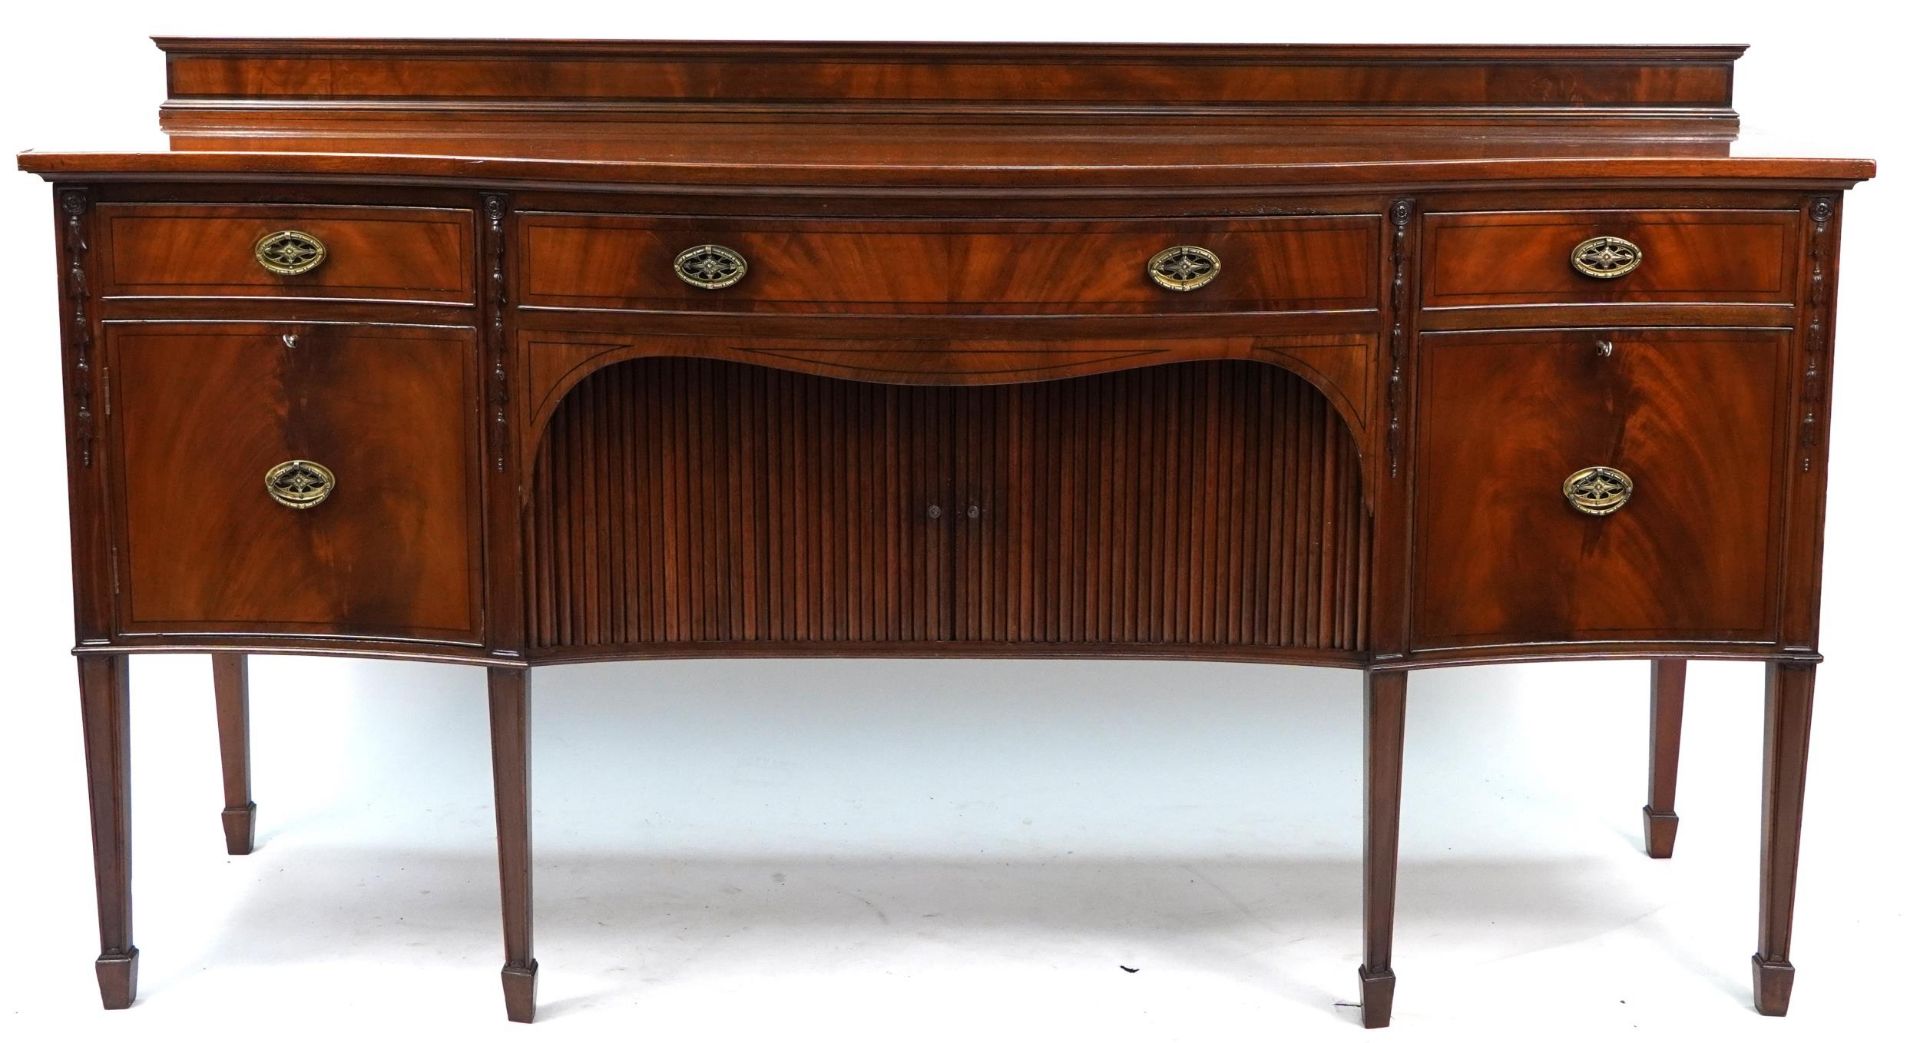 Inlaid mahogany serpentine front sideboard with tambour doors, cupboard doors and drawers raised